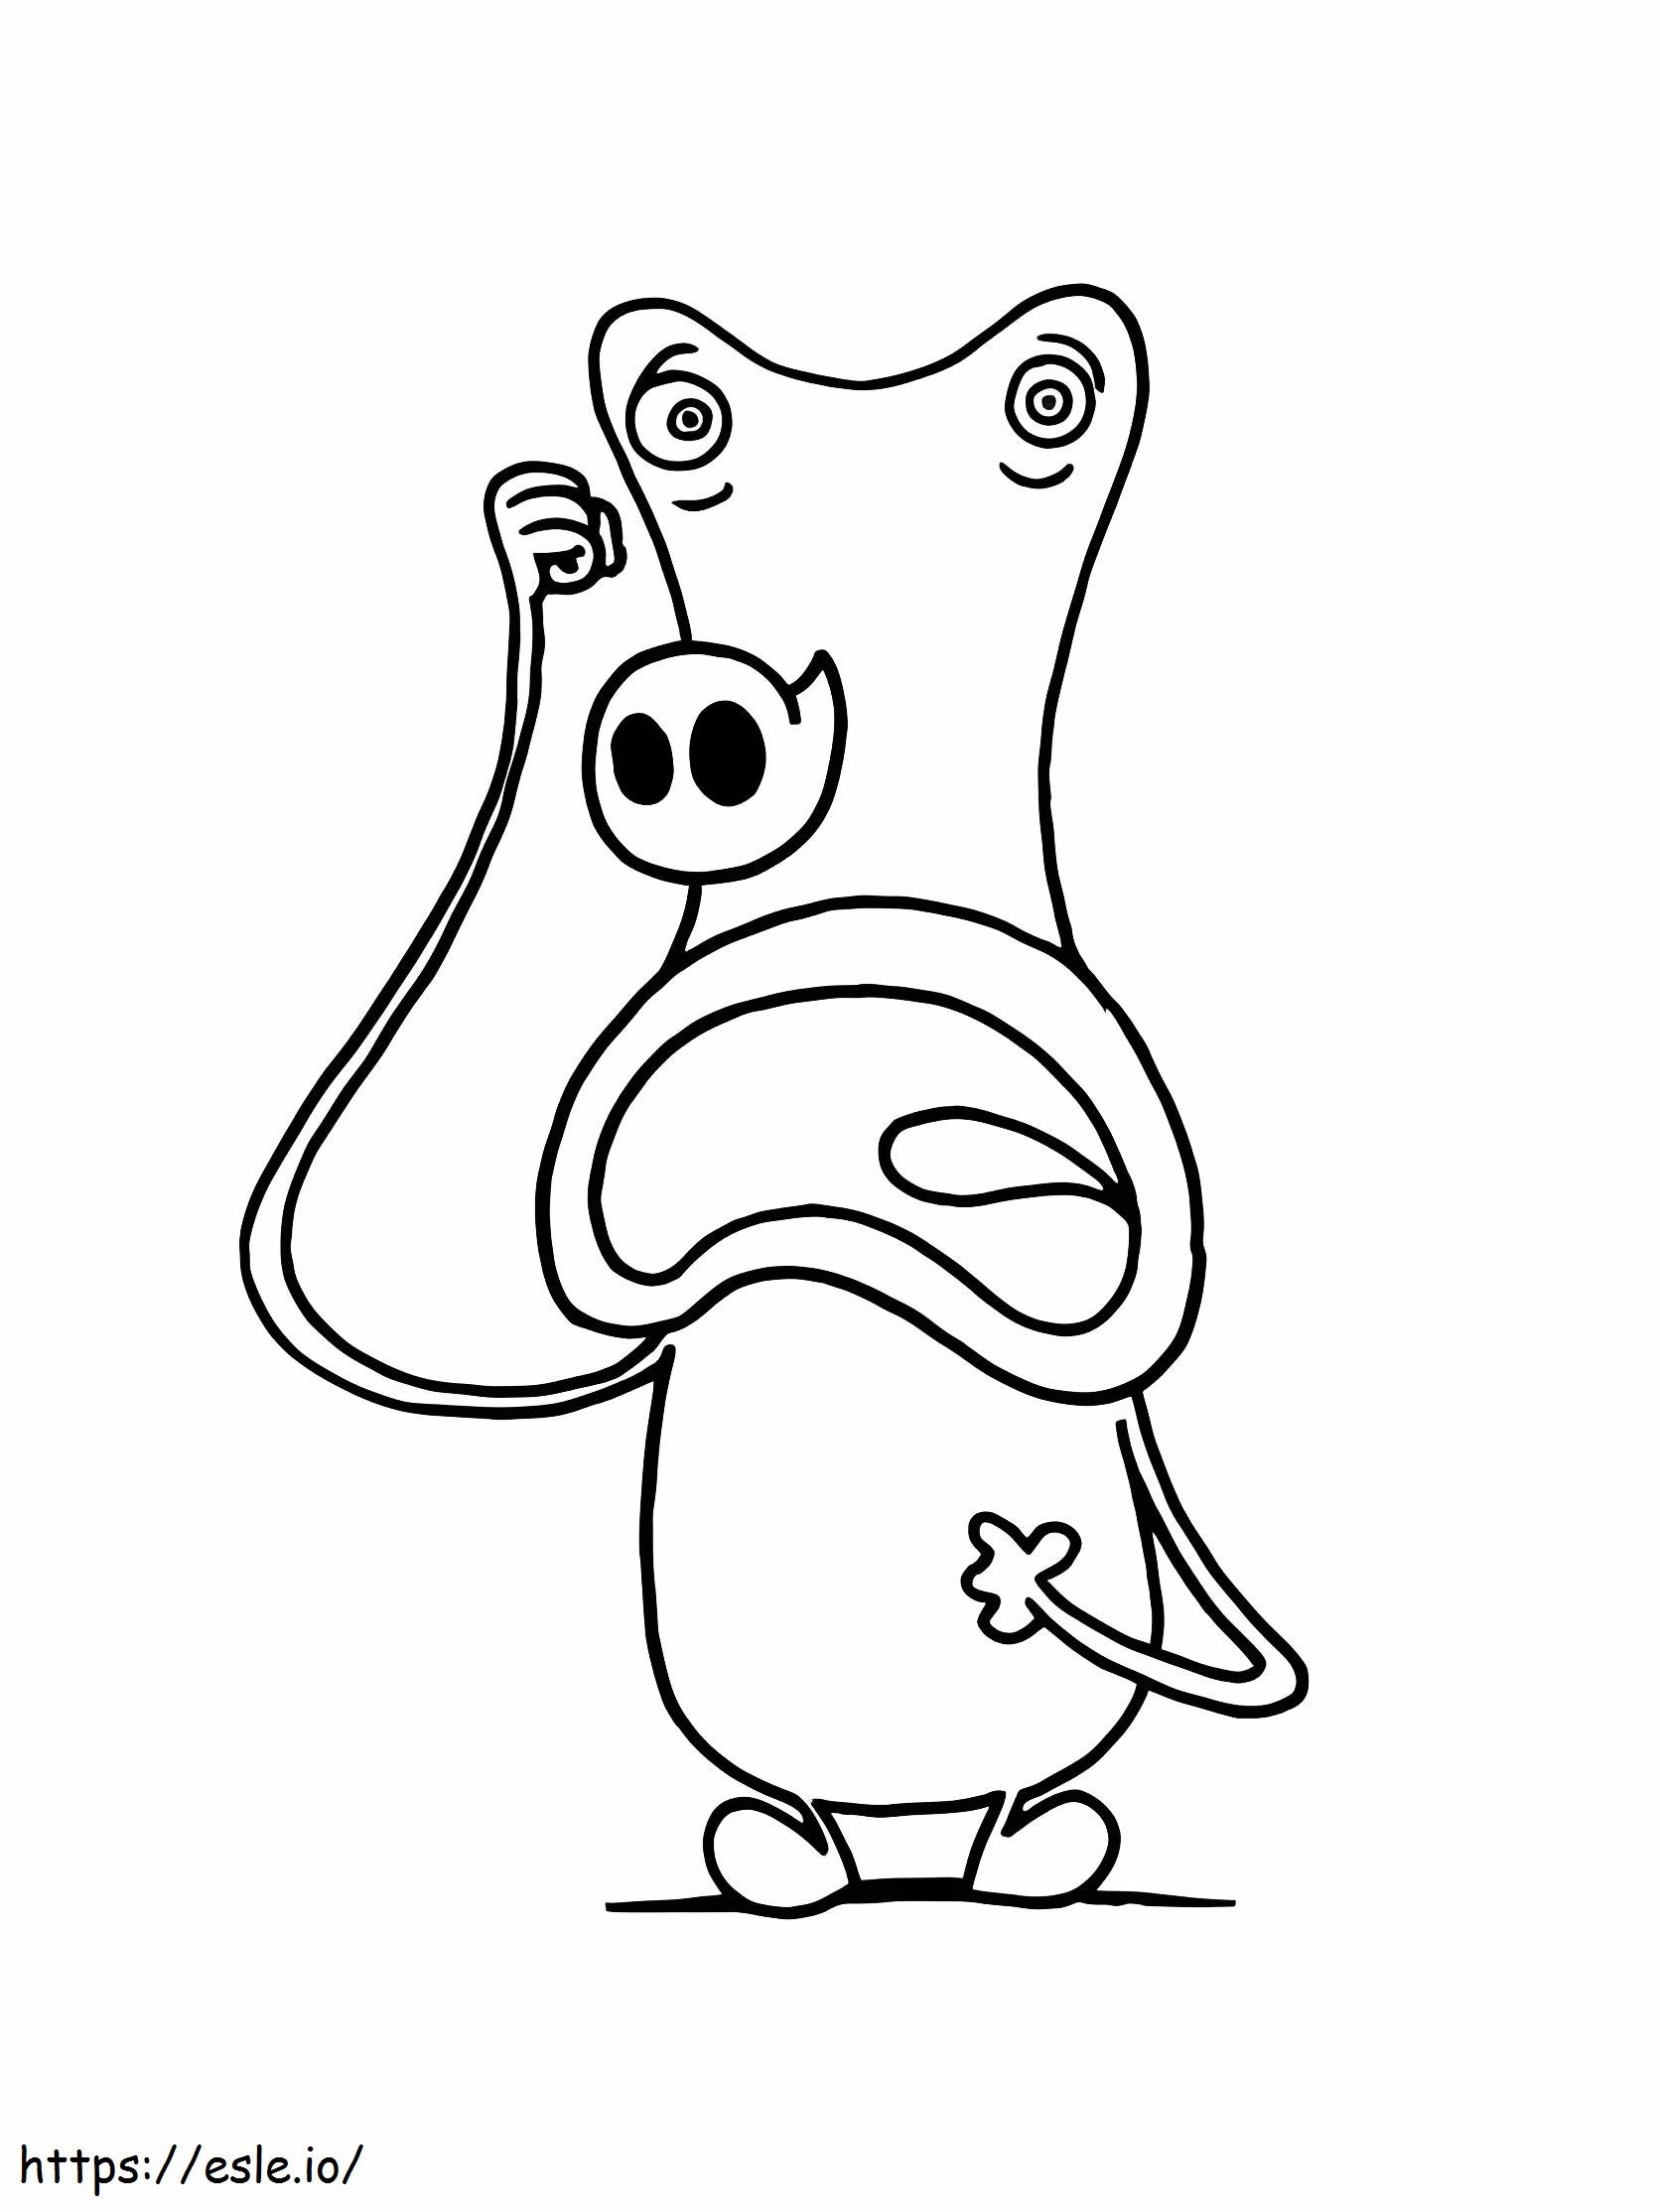 Etno Polino Space Goofs coloring page